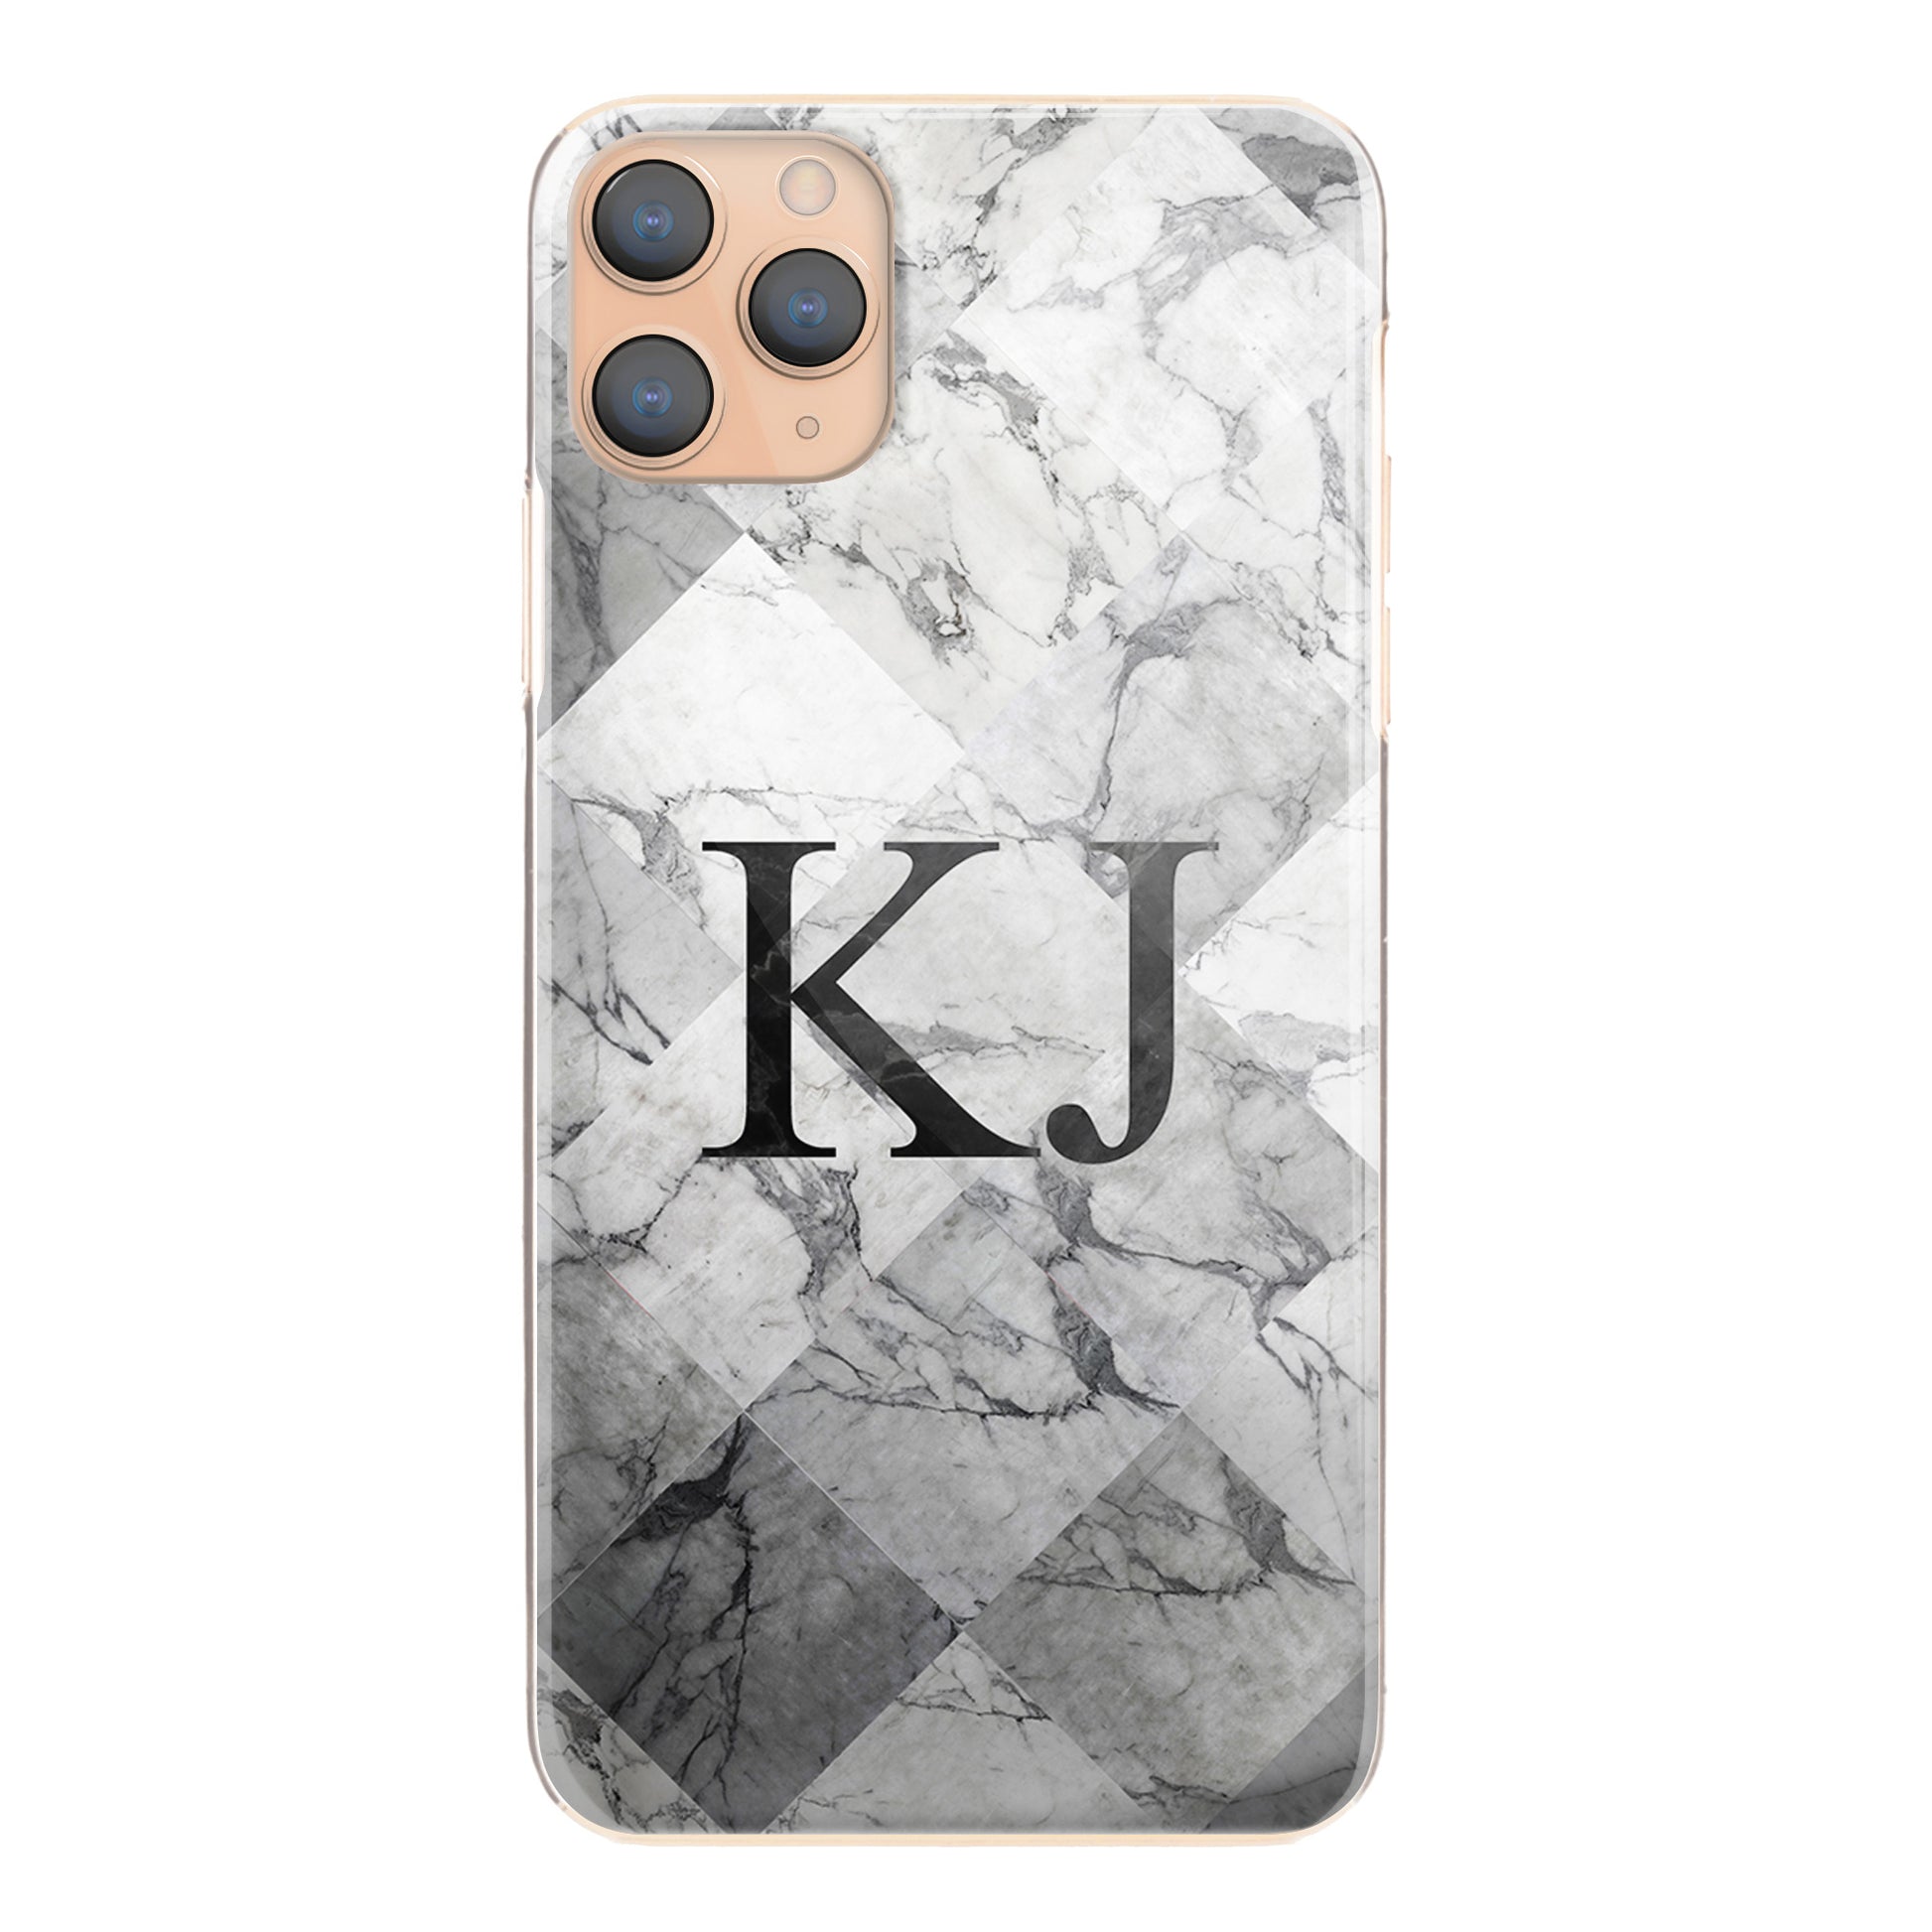 Personalised LG Phone Hard Case with Traditional Initials on Patterned Grey Marble